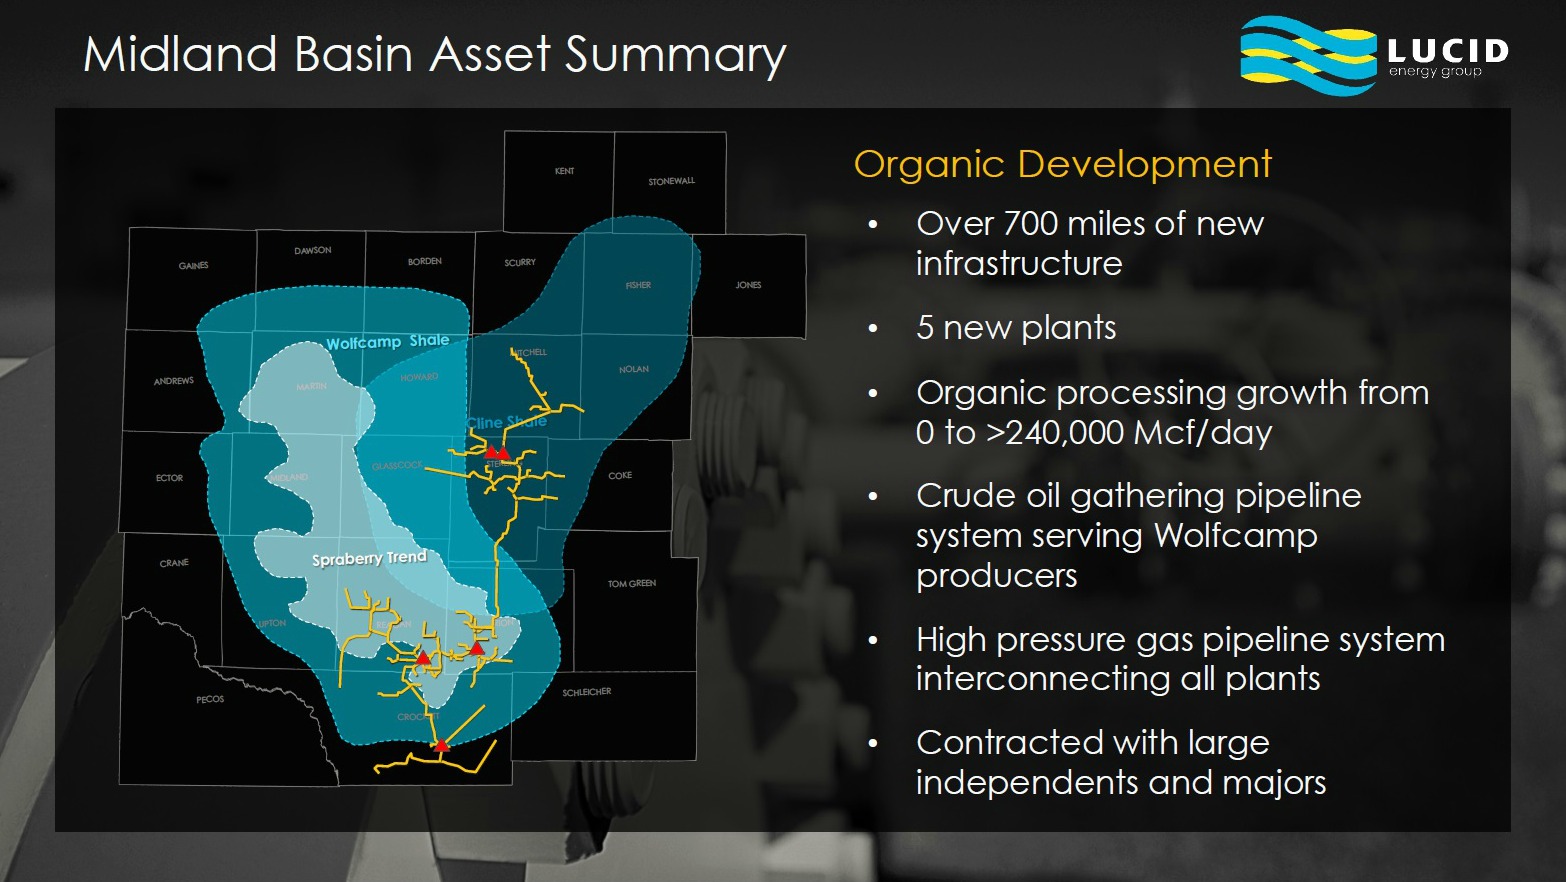 Lucid Energy has been involved in the Midland Basin since 2012, and still sees good opportunities for growth. (Source: Lucid Energy, Midstream Texas, 2017)